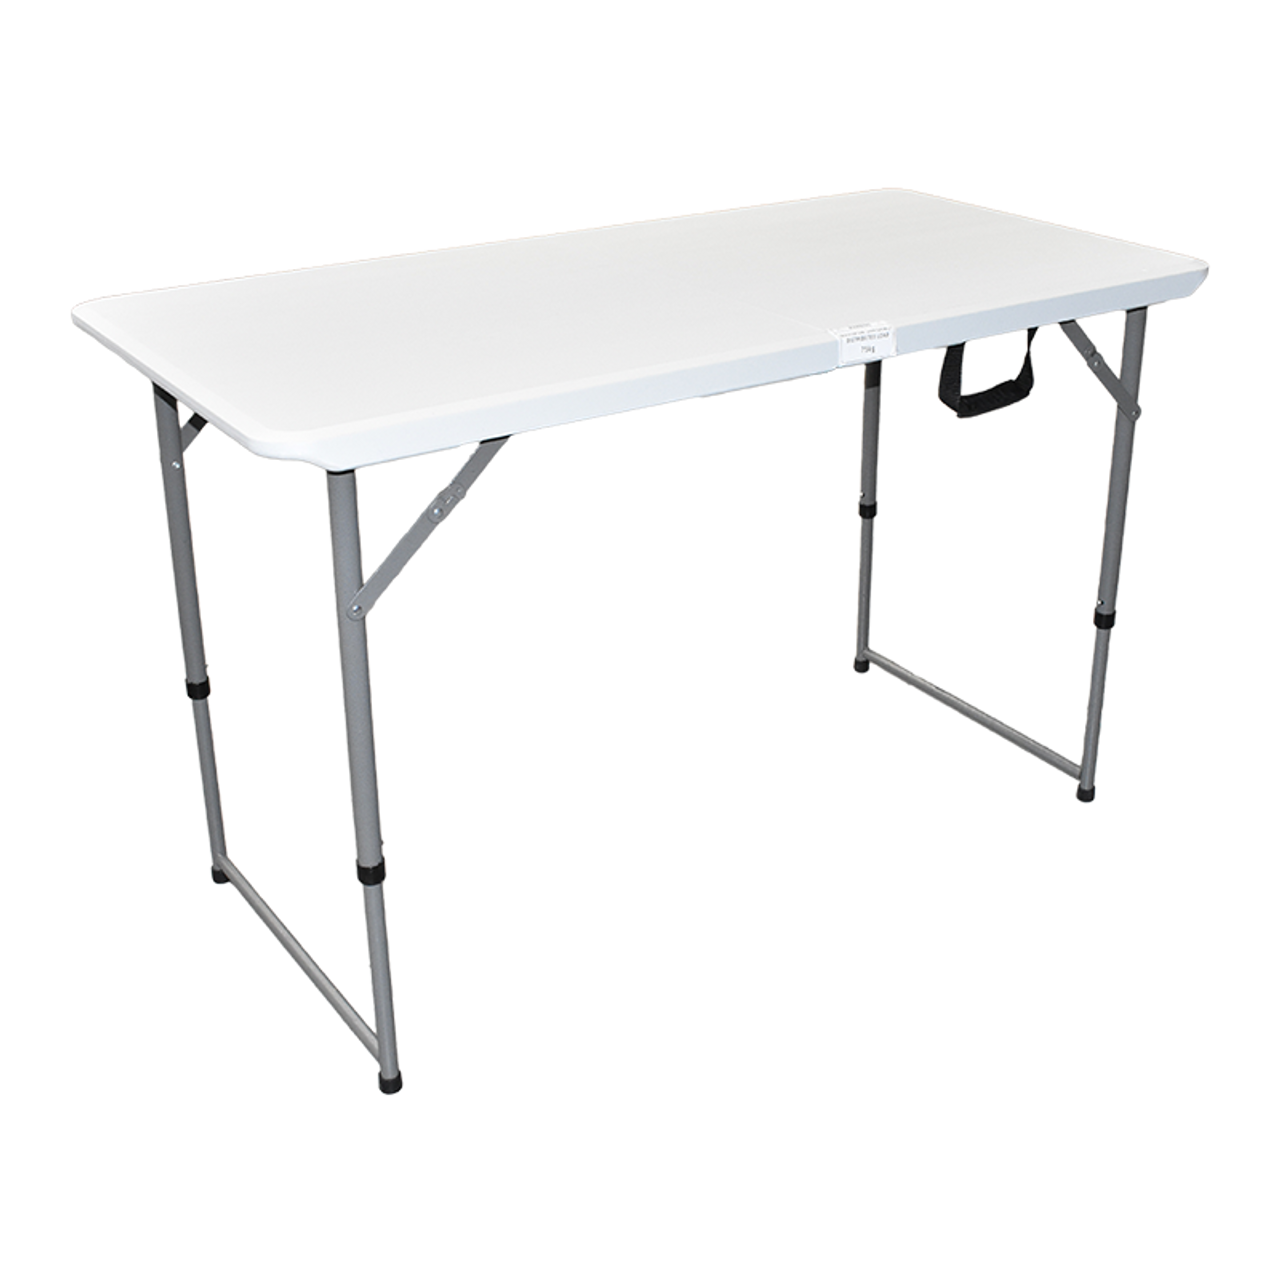 4' Bi-Folding Table With Telescopic Legs And One Touch Lock, 120X60Cm. Hy-Z122C | 400-01902